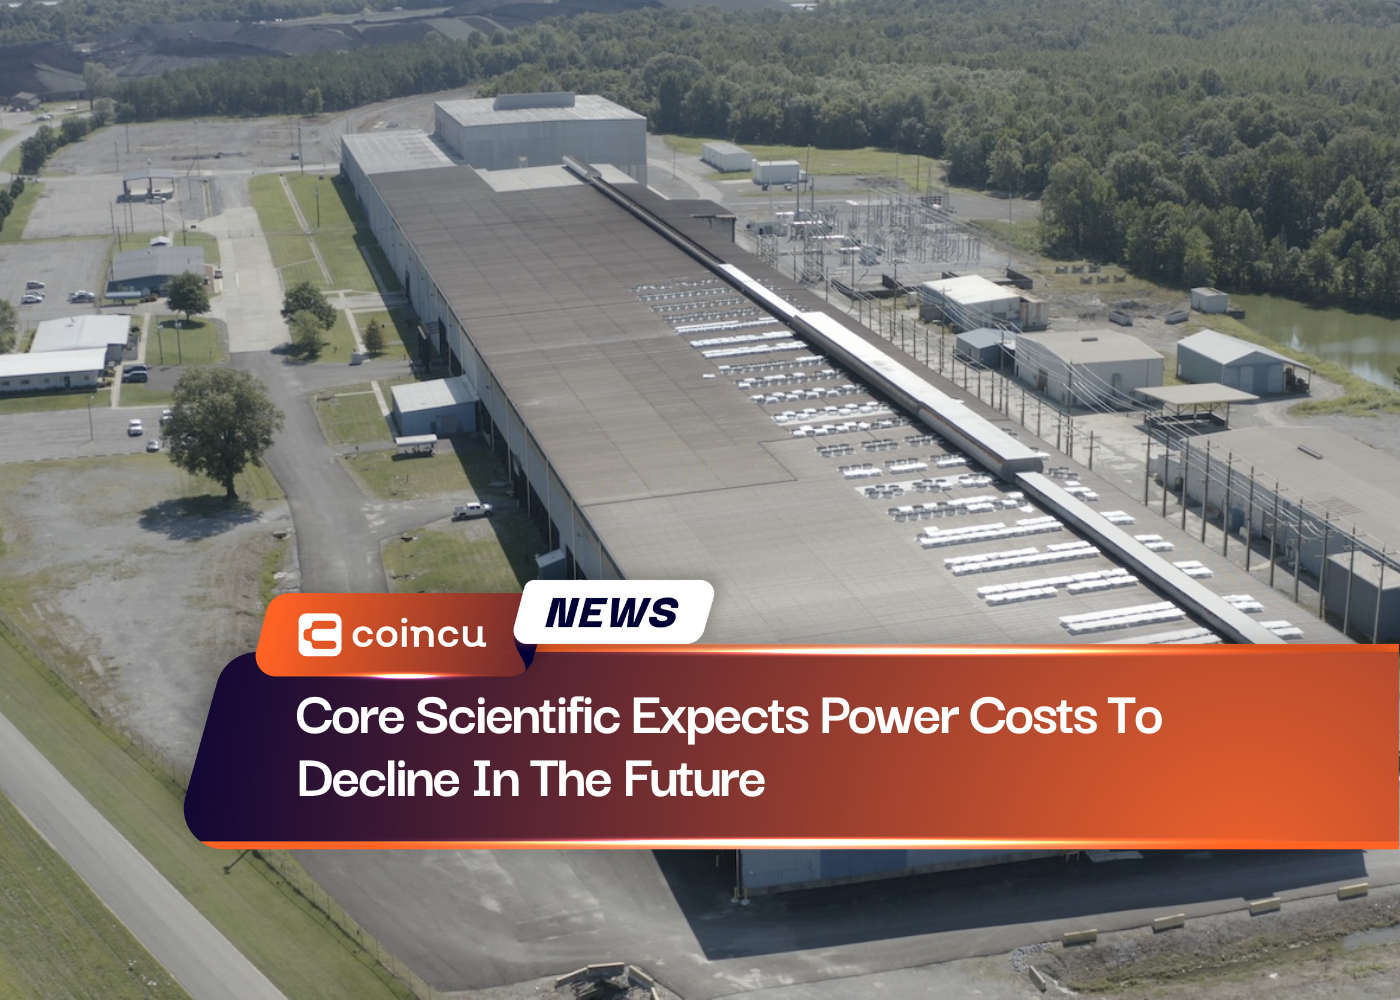 Core Scientific Expects Power Costs To Decline In The Future